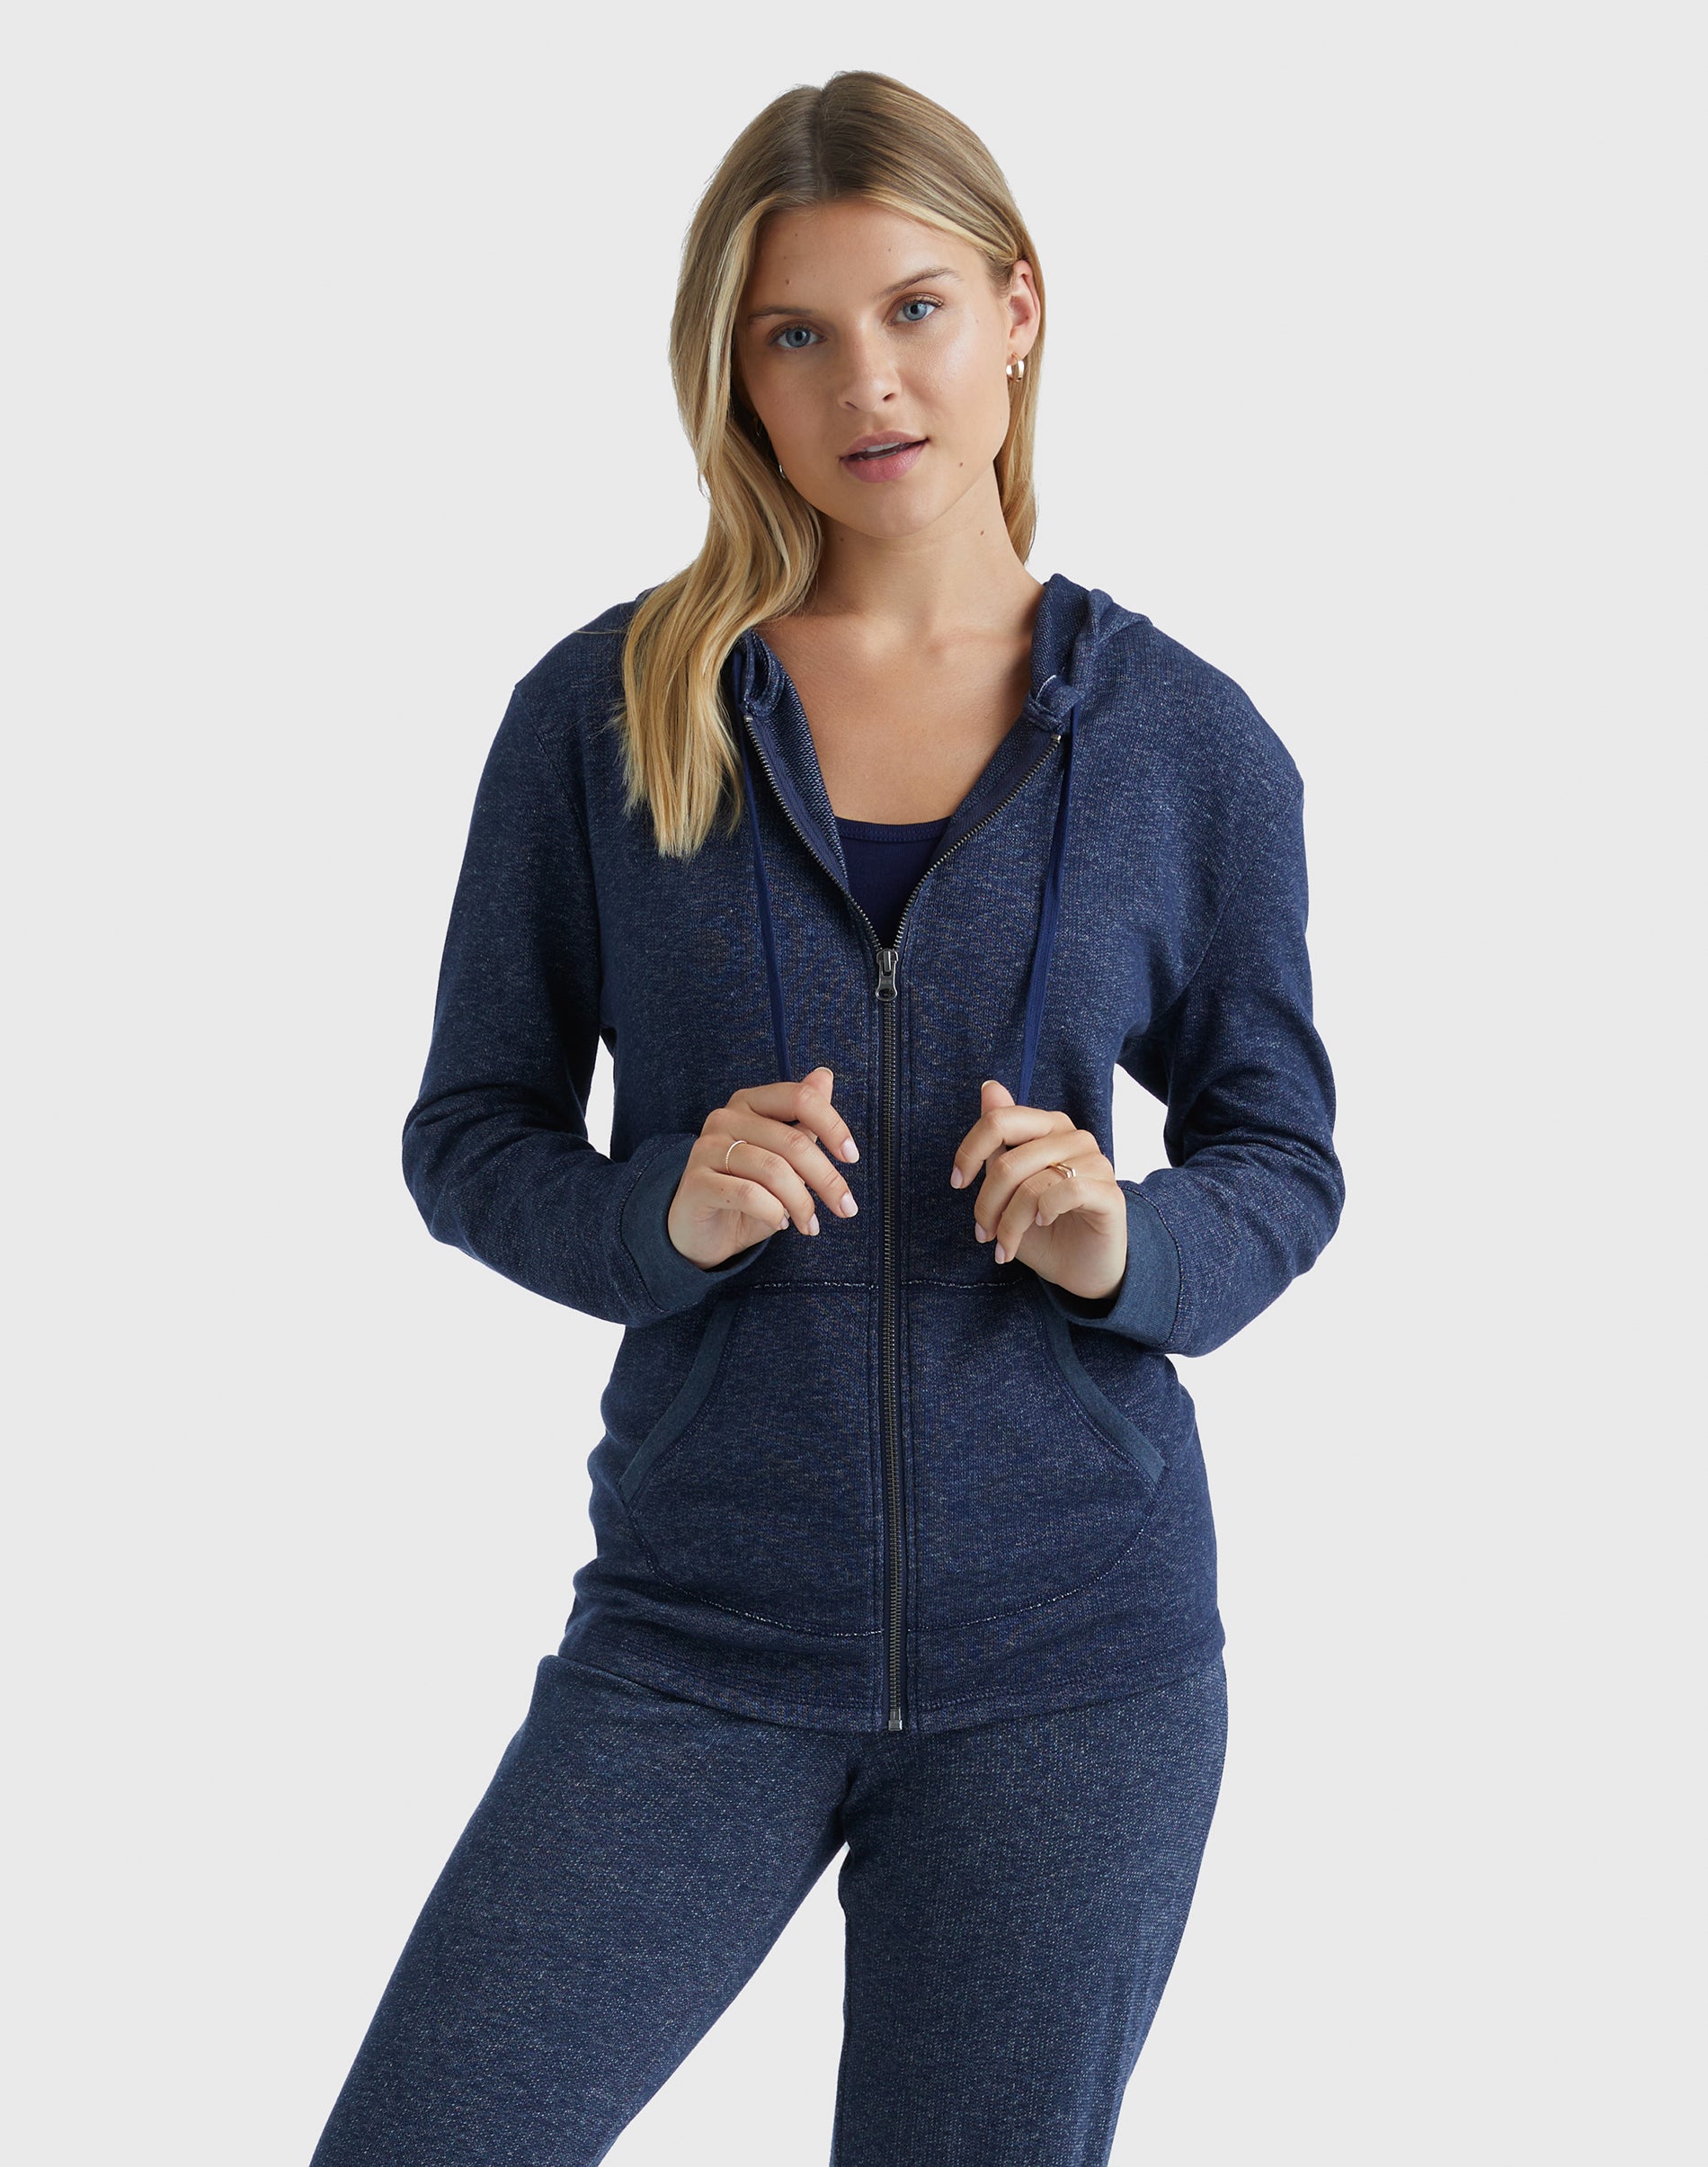 Women's lightweight hoodie are versatile and comfortable wardrobe staples that offer both style and functionality.